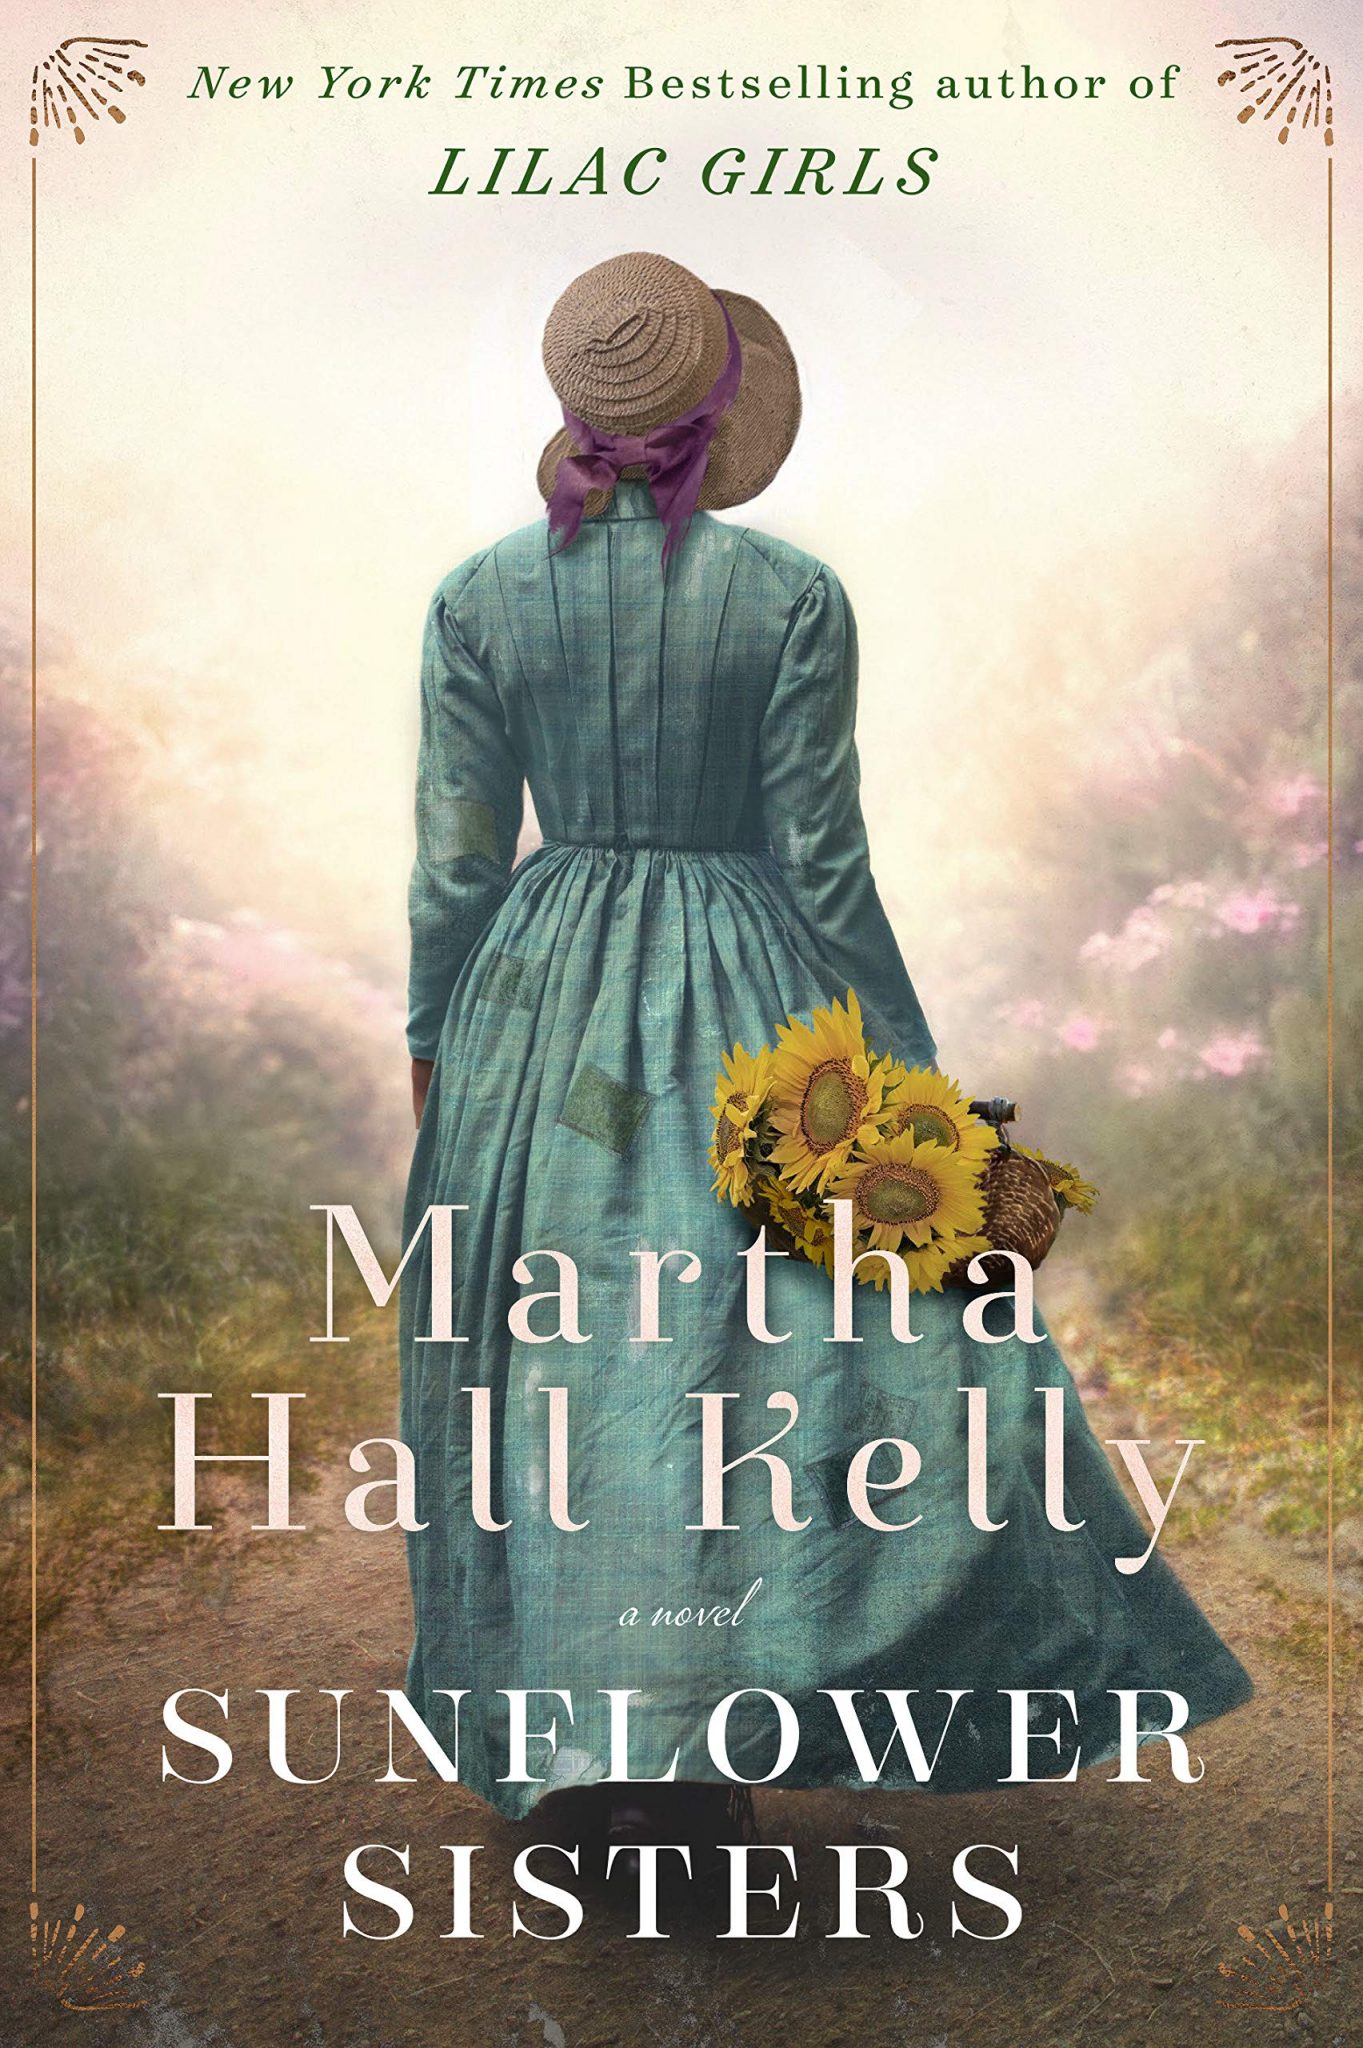 Book cover of Sunflower Sisters by Martha Hall Kelly